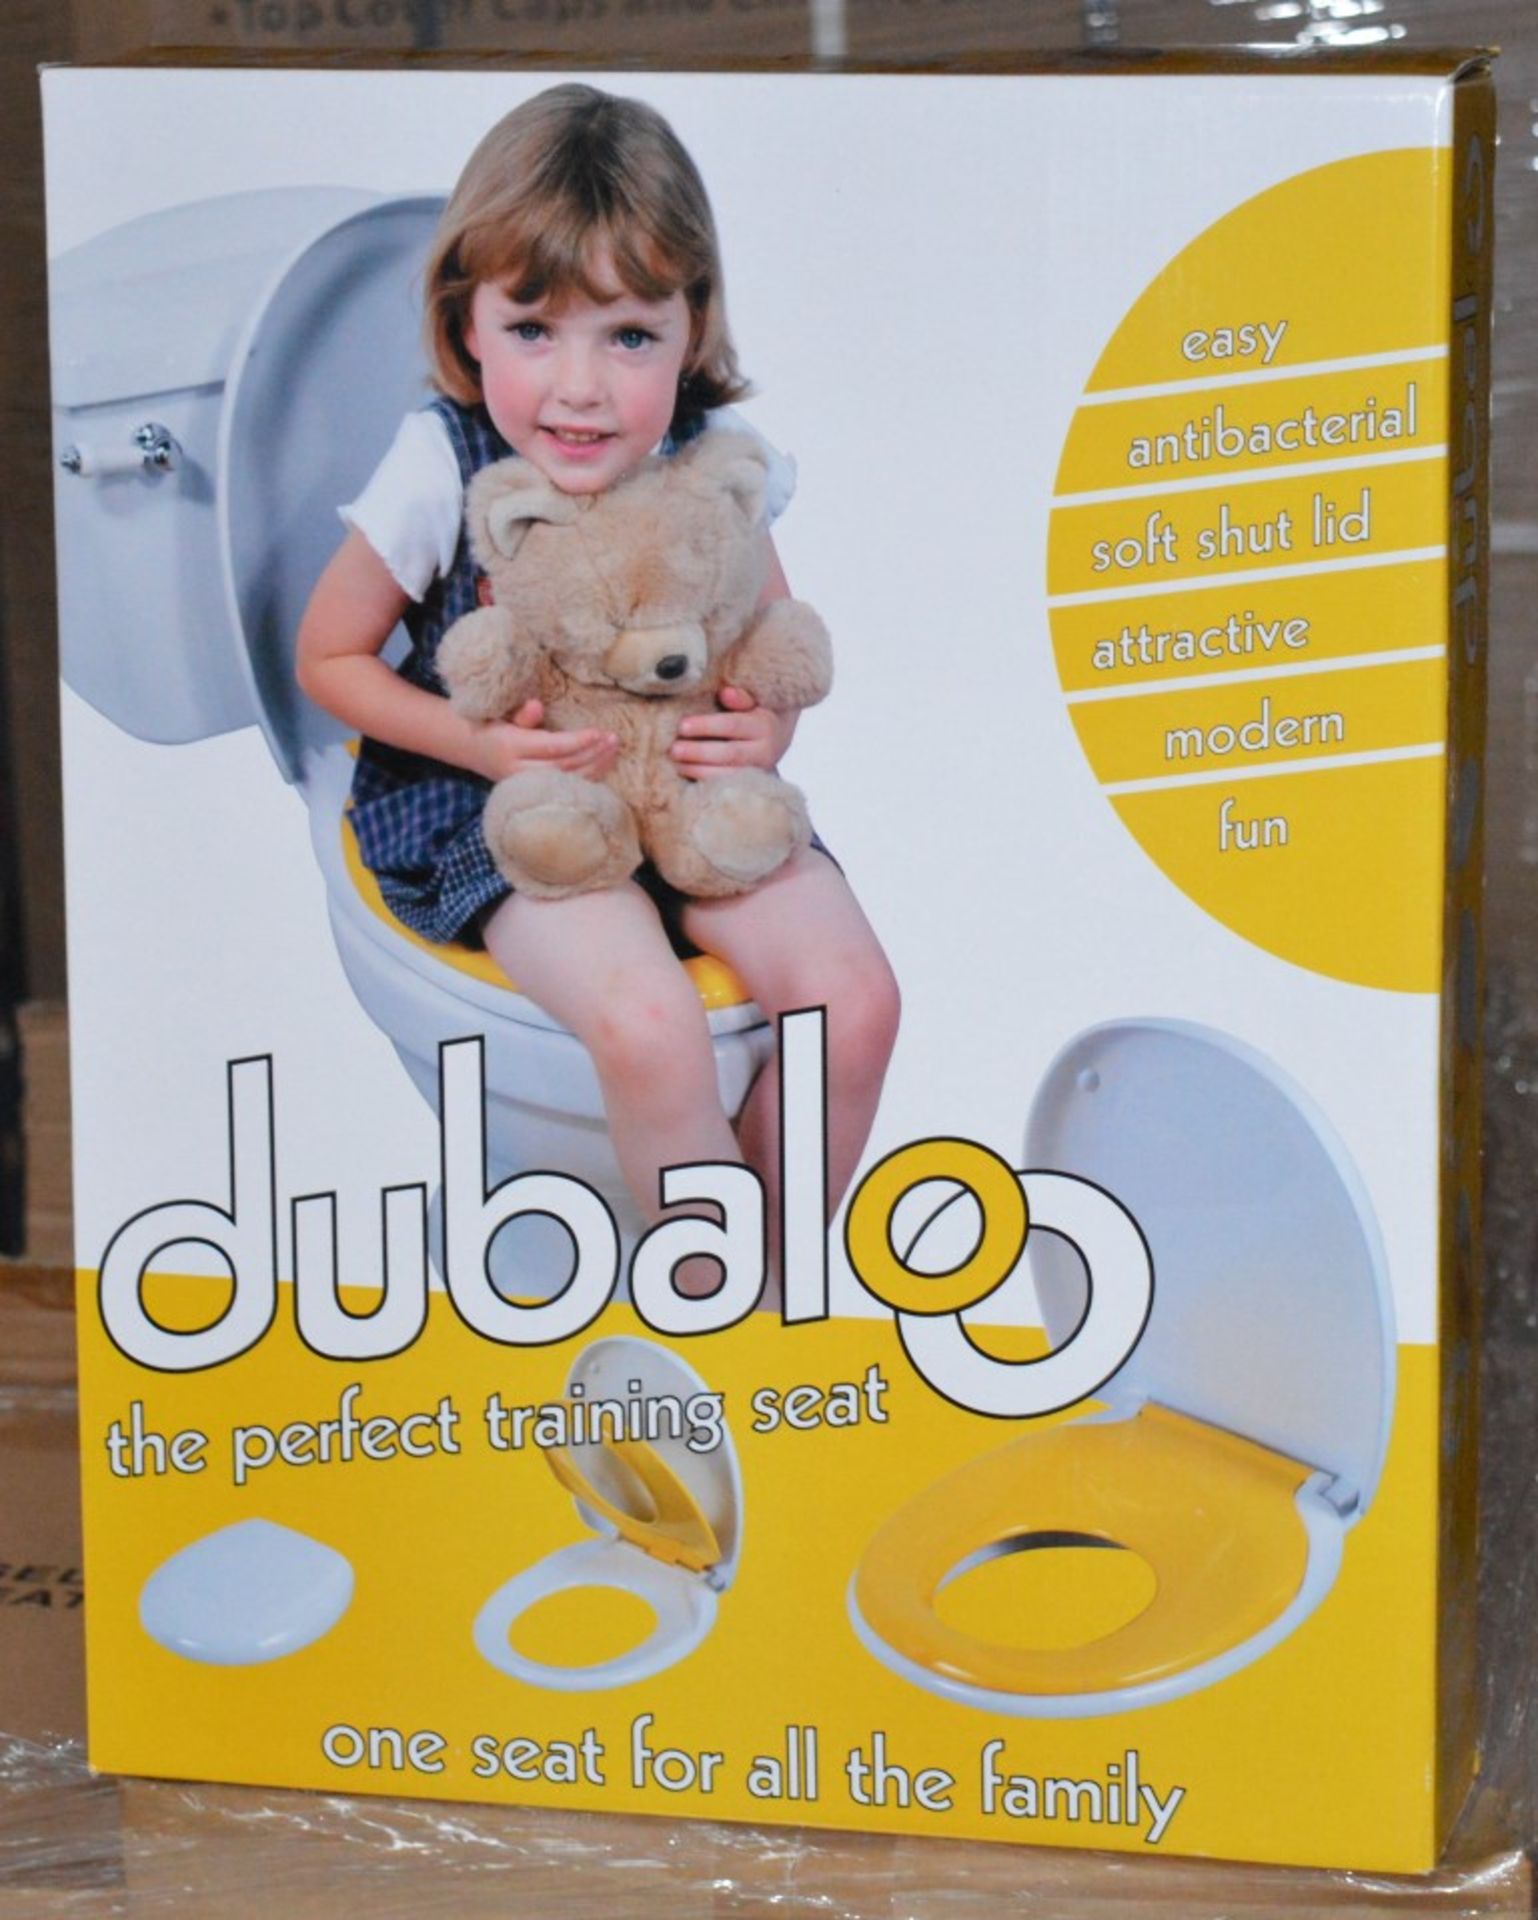 5 x Dubaloo 2 in 1 Family Training Toilet Seats - One Seat For All The Family - Full Size Toilet - Image 4 of 7